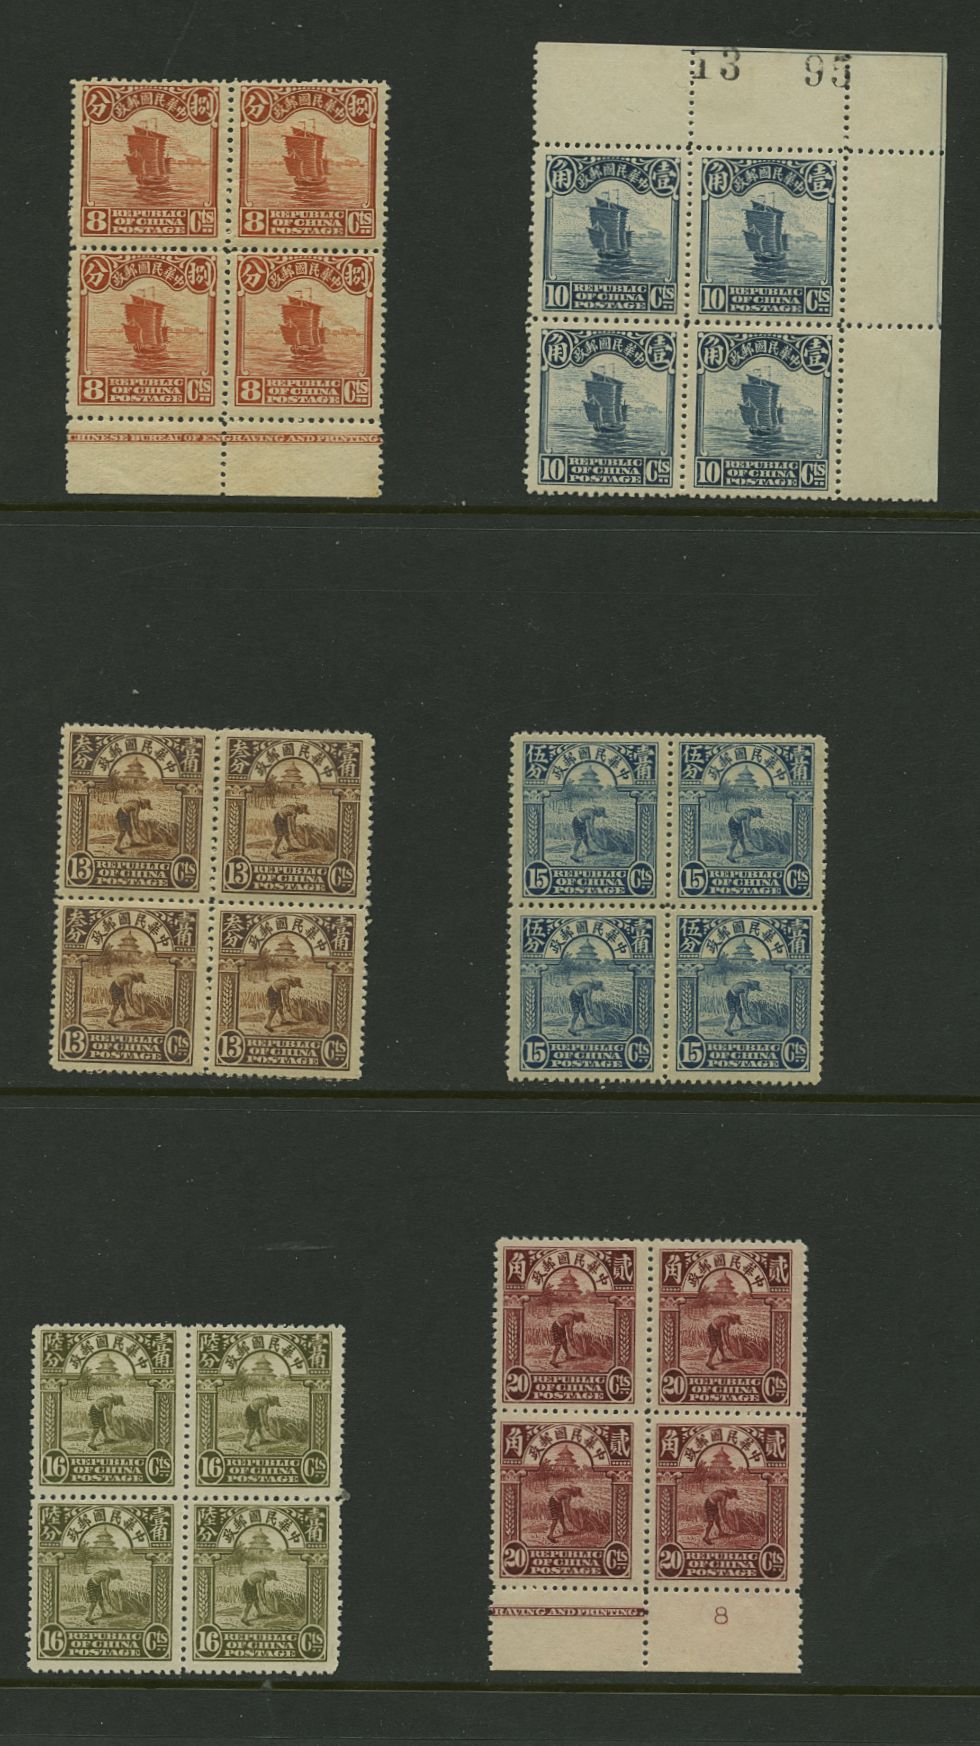 248-54 and 256-62 Second Peking Print in blocks of four, 6c is 324, most top two LH, 252 light toned spots on gum, 253 light crease, 257 light toned spot, CV $600+ (2 images)